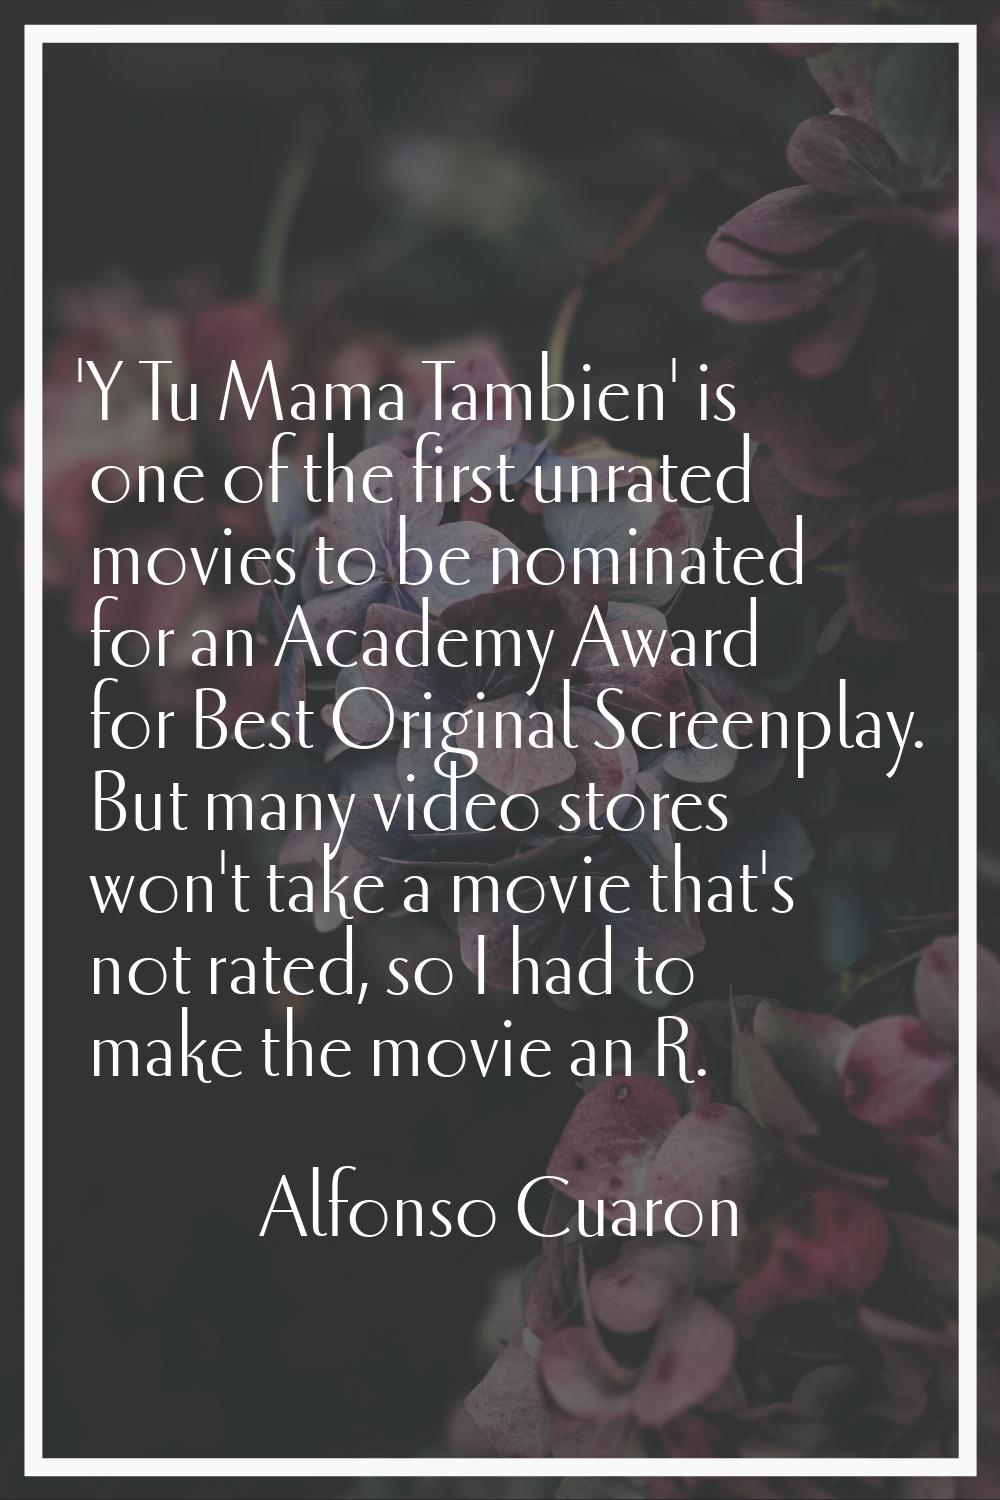 'Y Tu Mama Tambien' is one of the first unrated movies to be nominated for an Academy Award for Bes